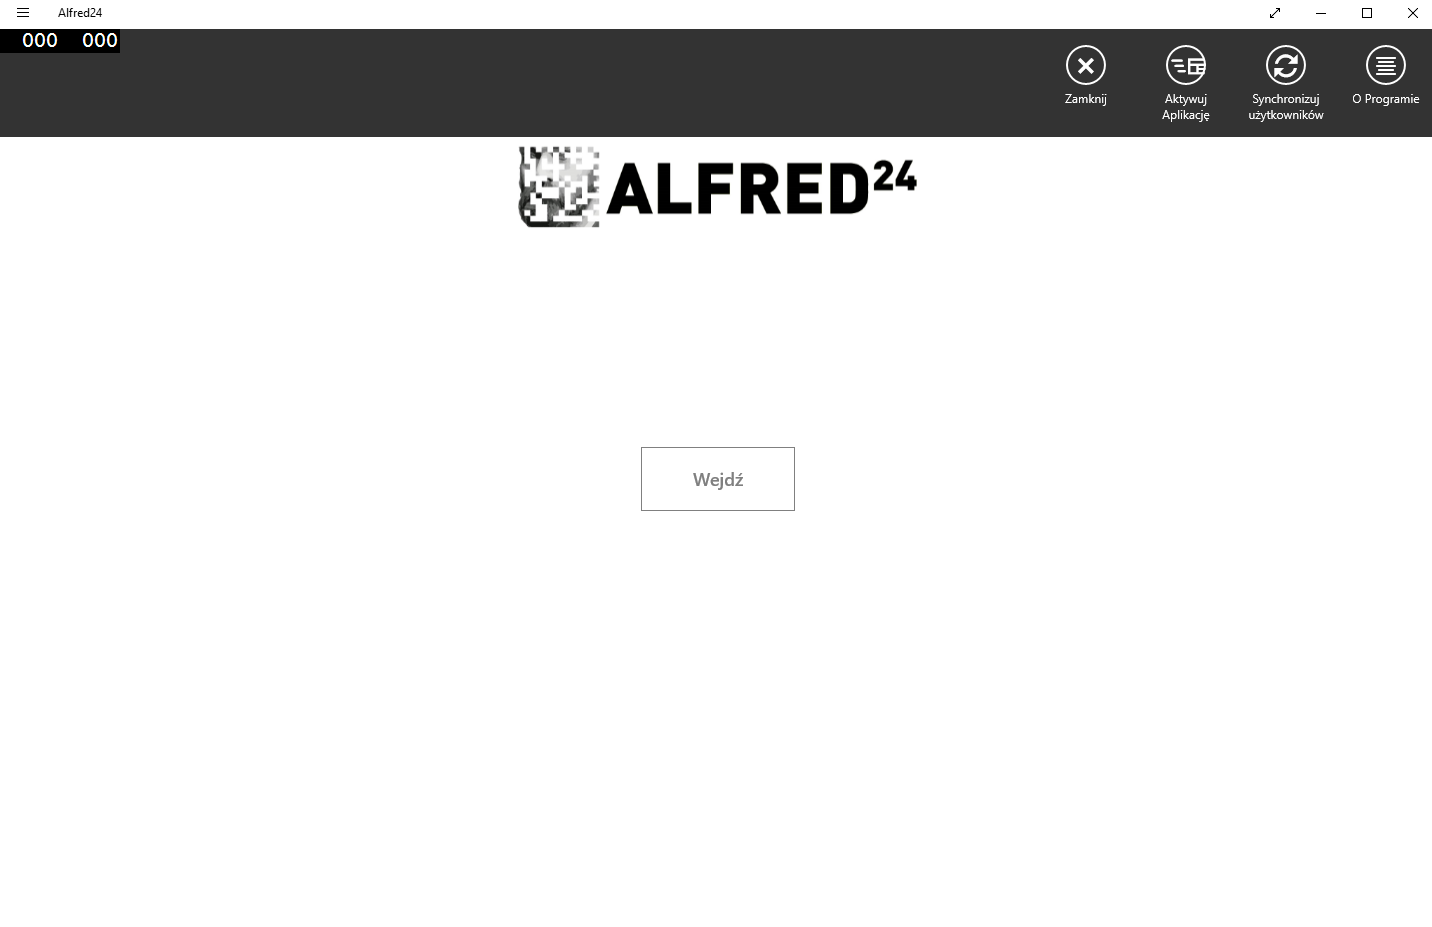 Alfred24